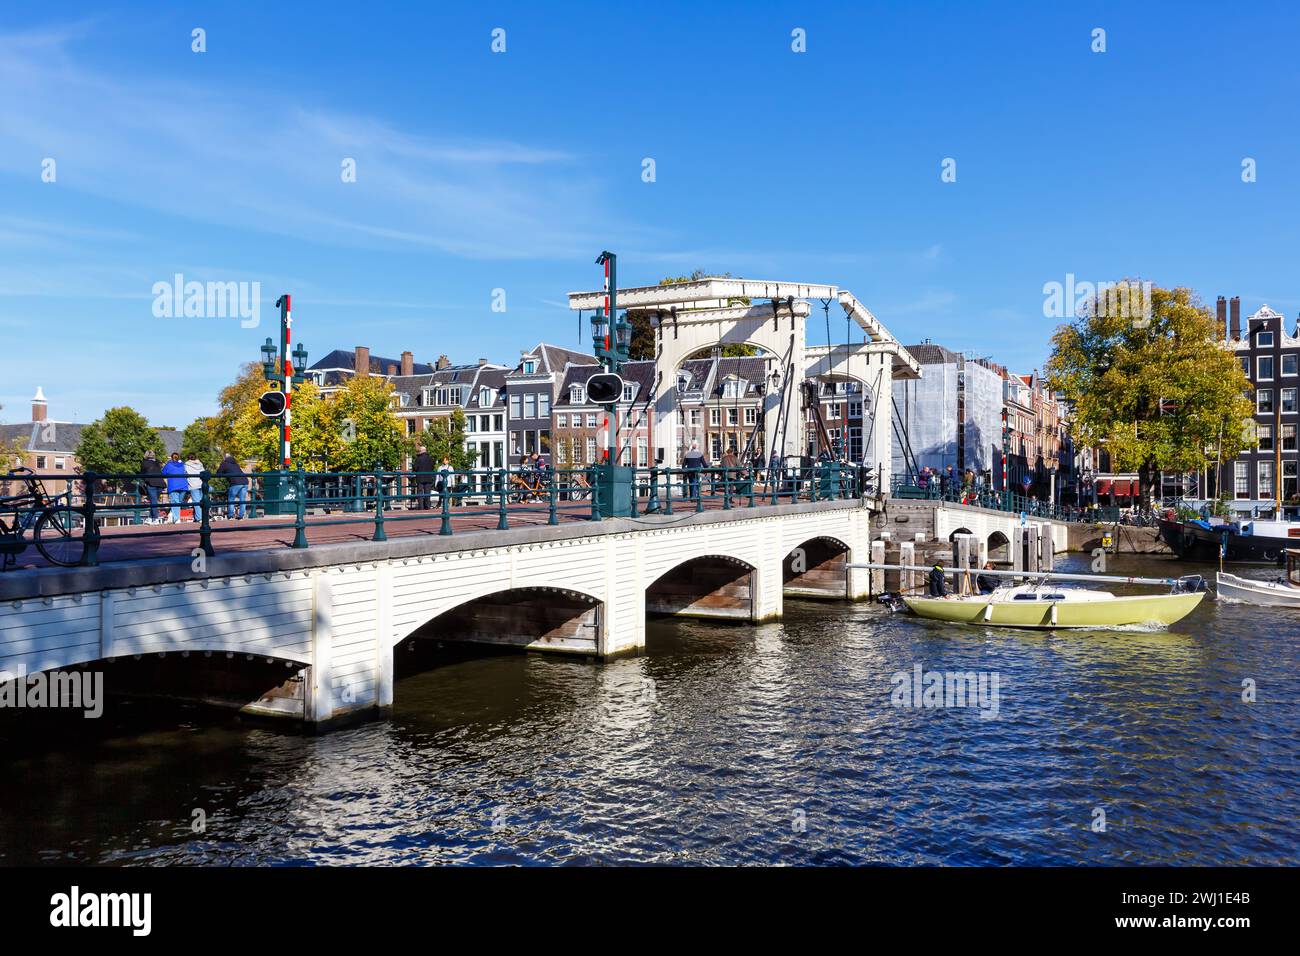 Magere Brug canal bridge on the Amstel in the city of Amsterdam, Netherlands Stock Photo